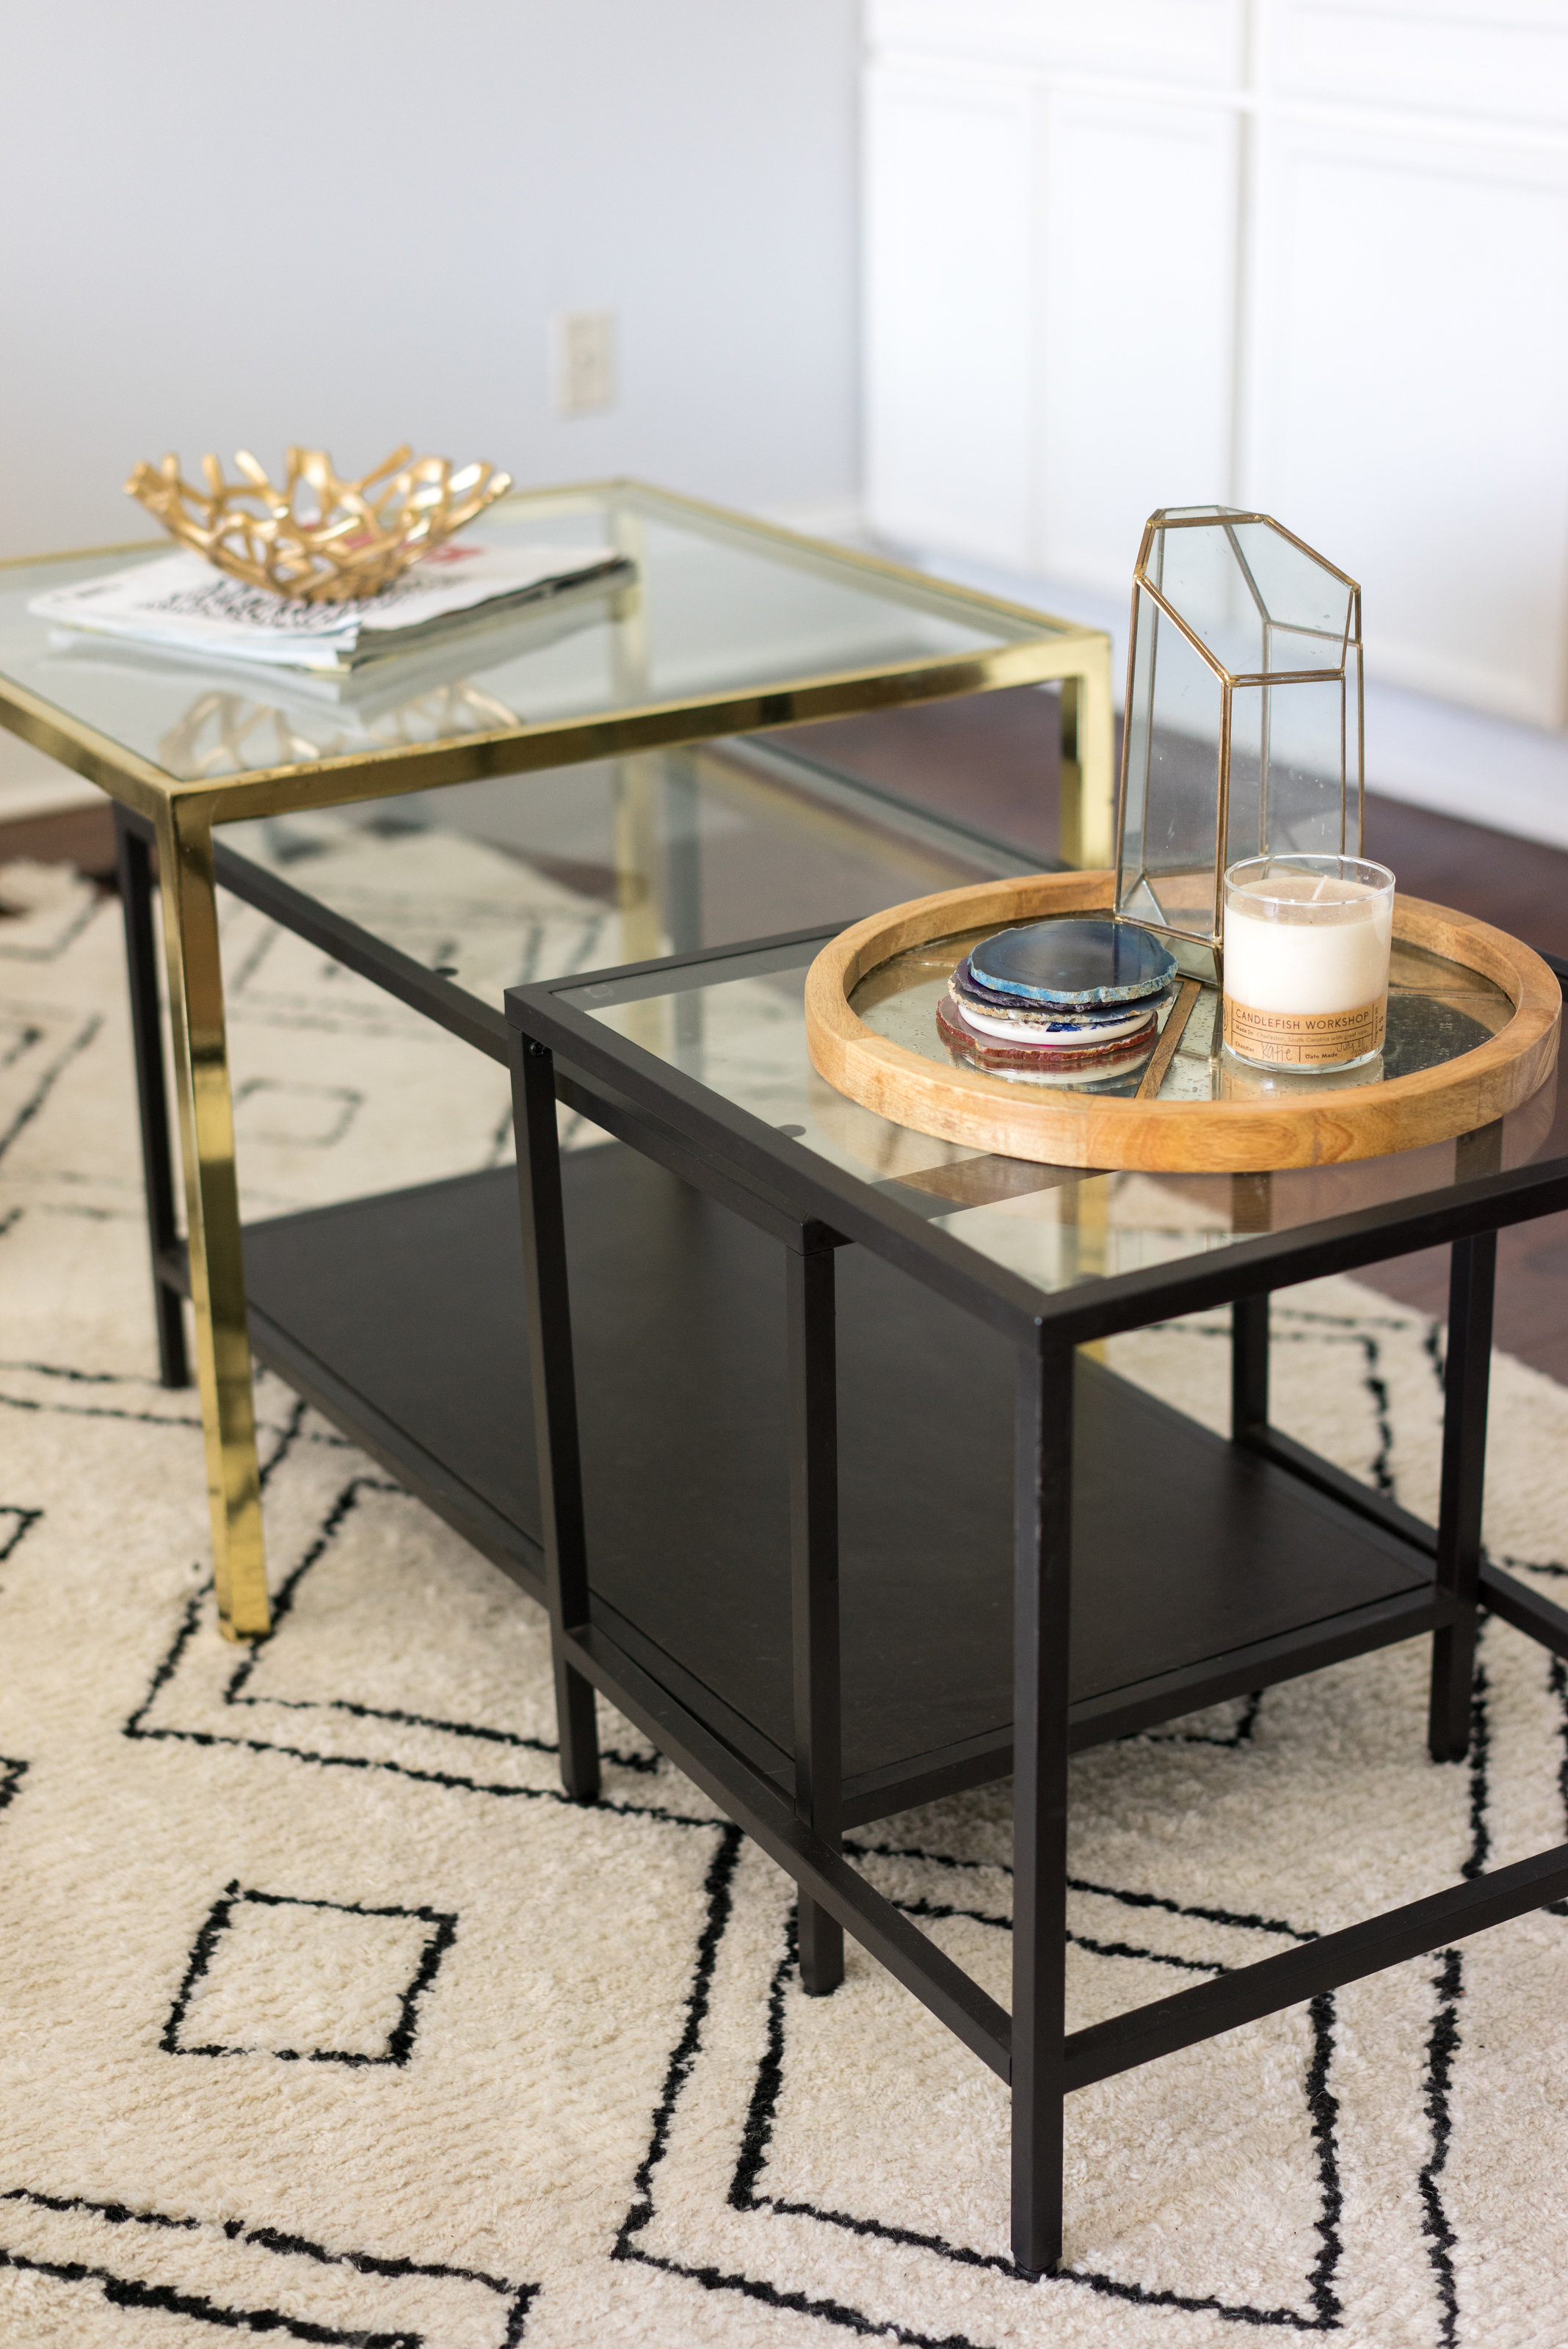 House Tour: A gold and black glass coffee table with coasters and a candle